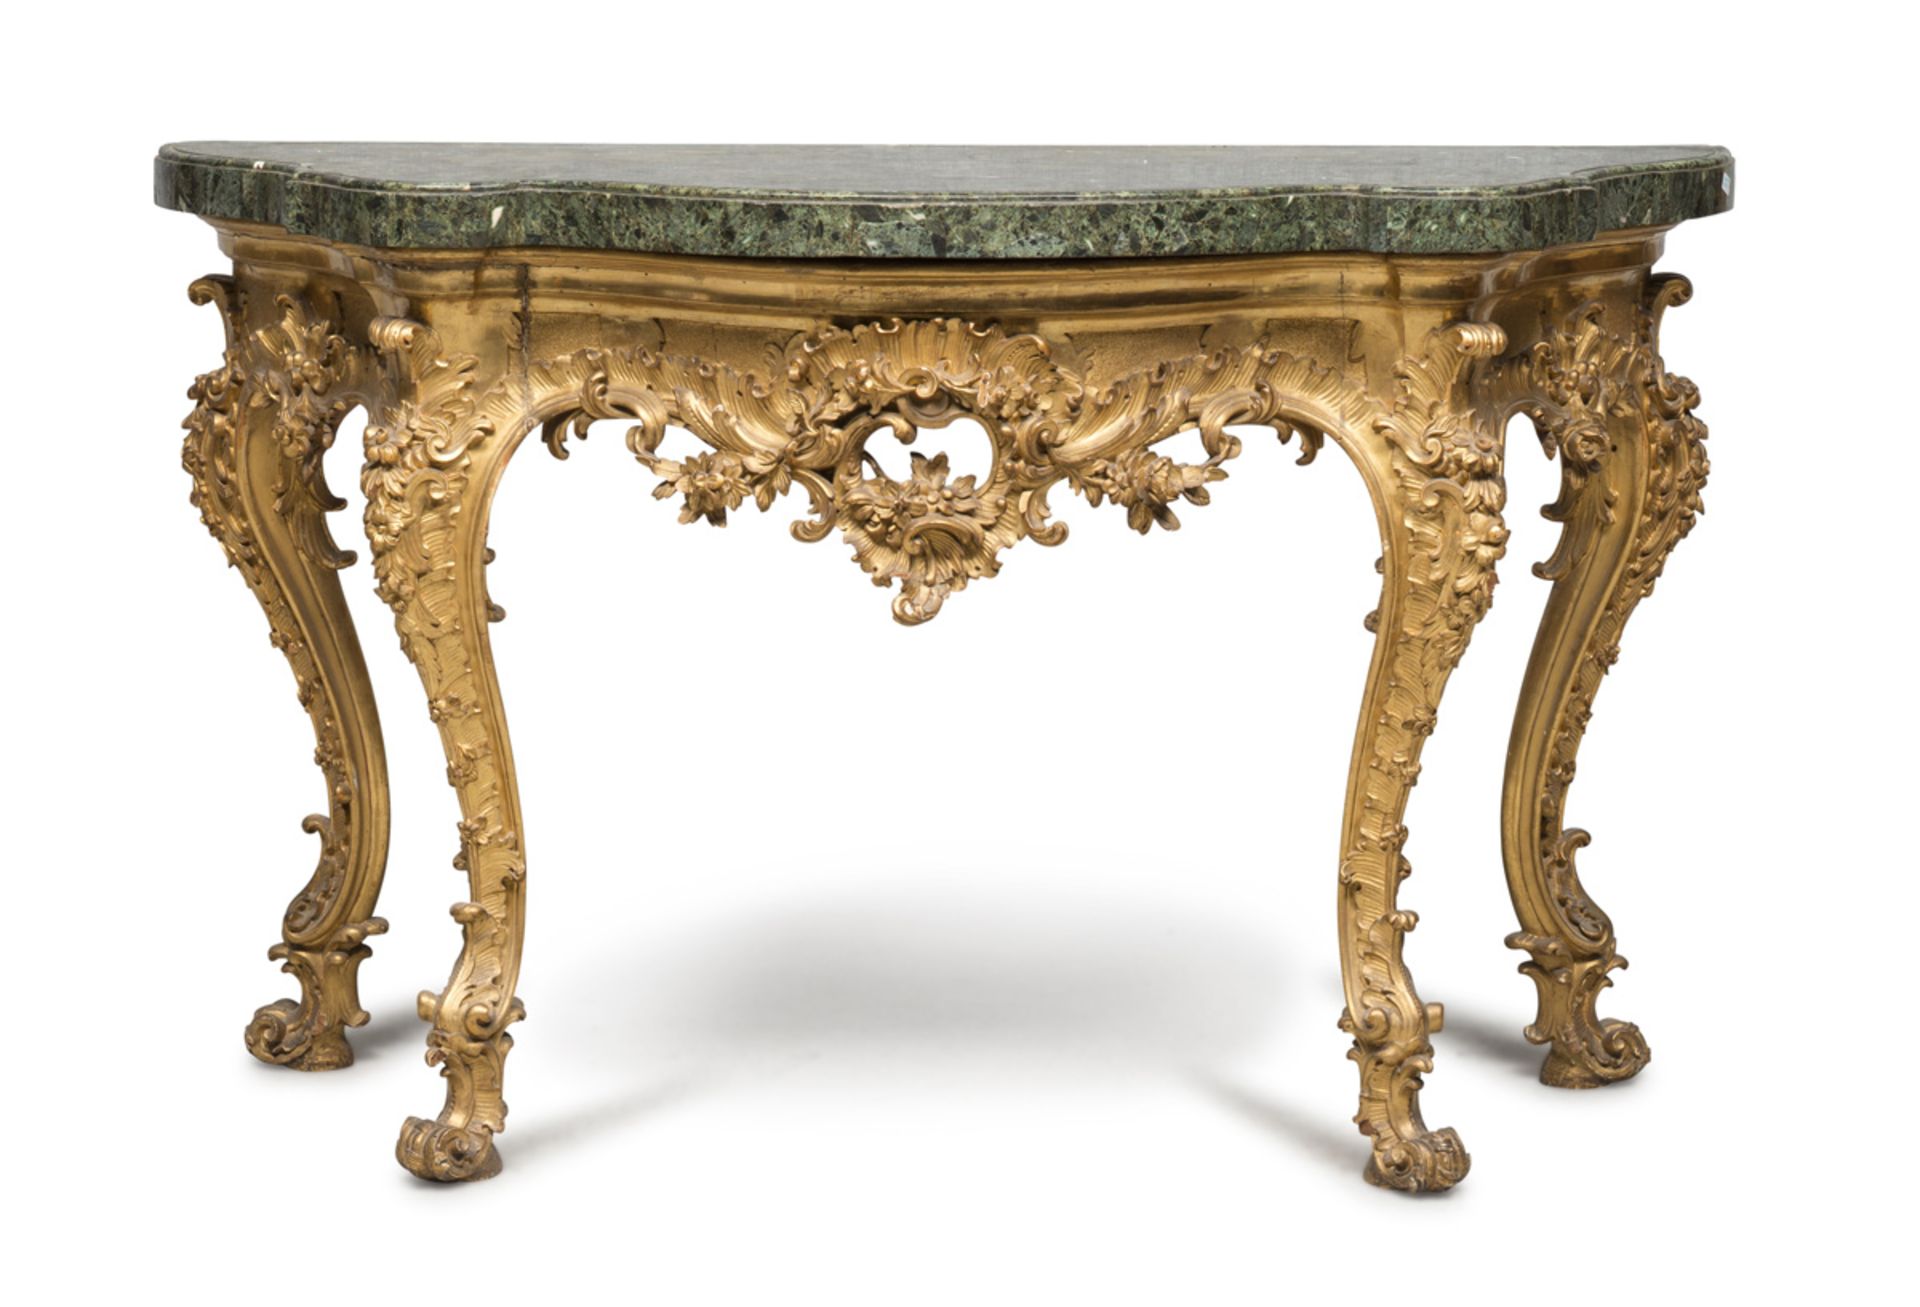 SPLENDID CONSOLE IN GILTWOOD ROME OR NAPLES 18TH CENTURY